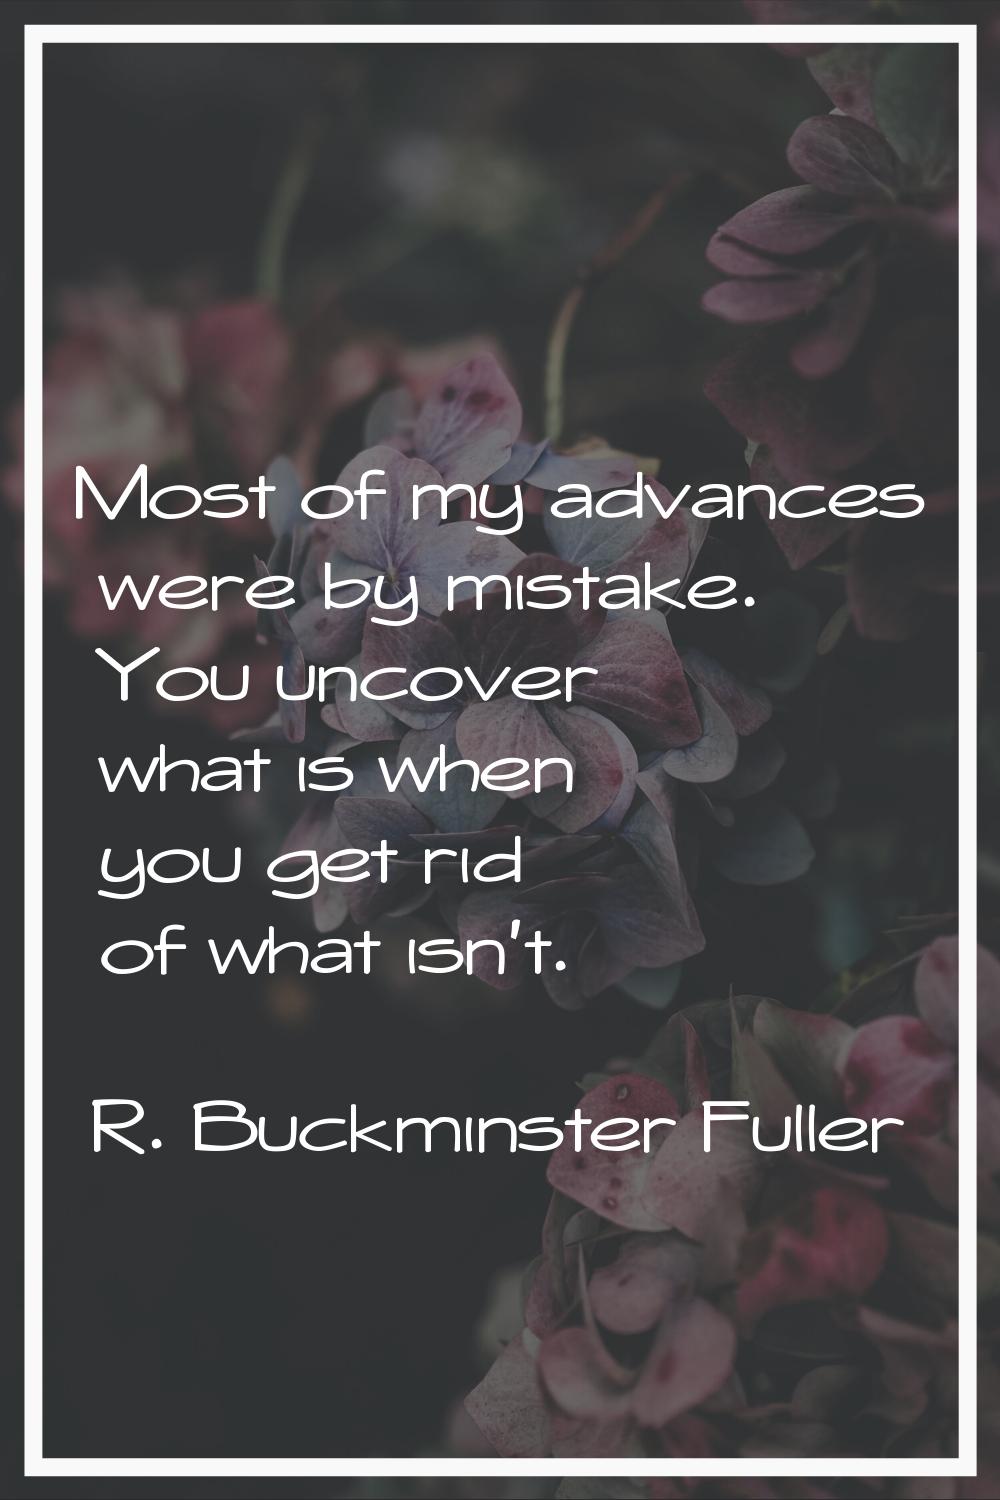 Most of my advances were by mistake. You uncover what is when you get rid of what isn't.